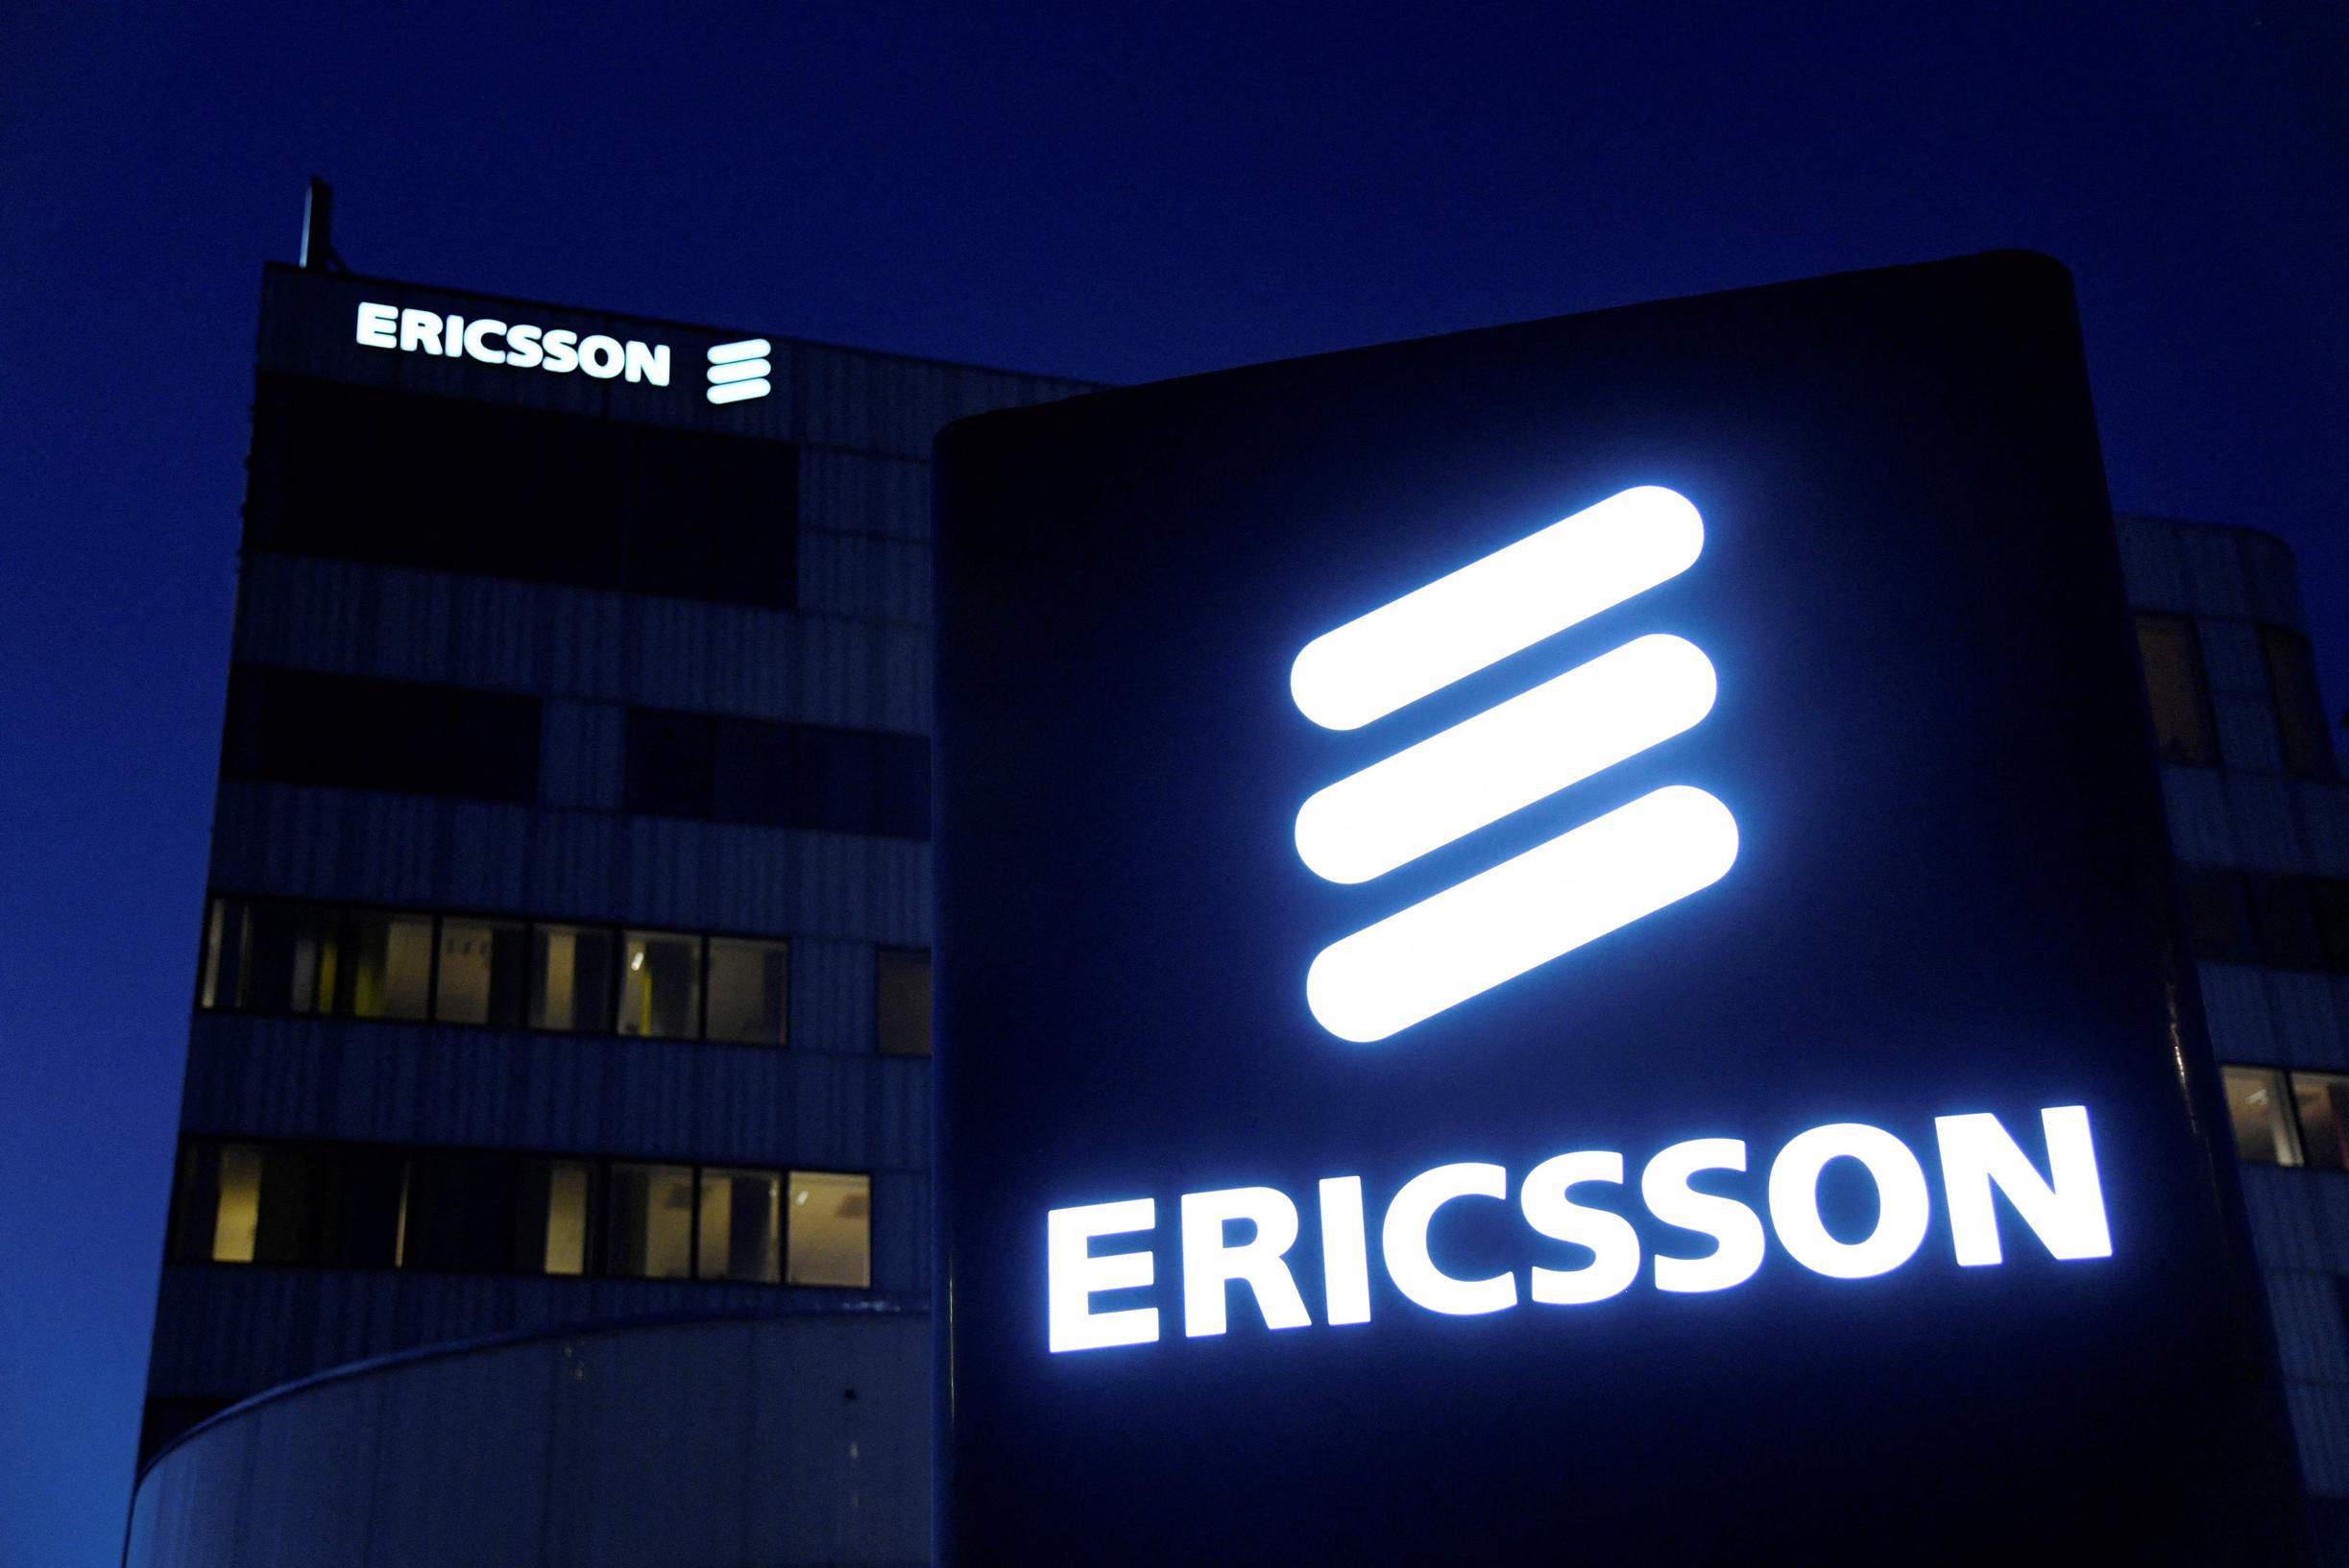 Ericsson to Lay Off 1,200 Employees in Sweden